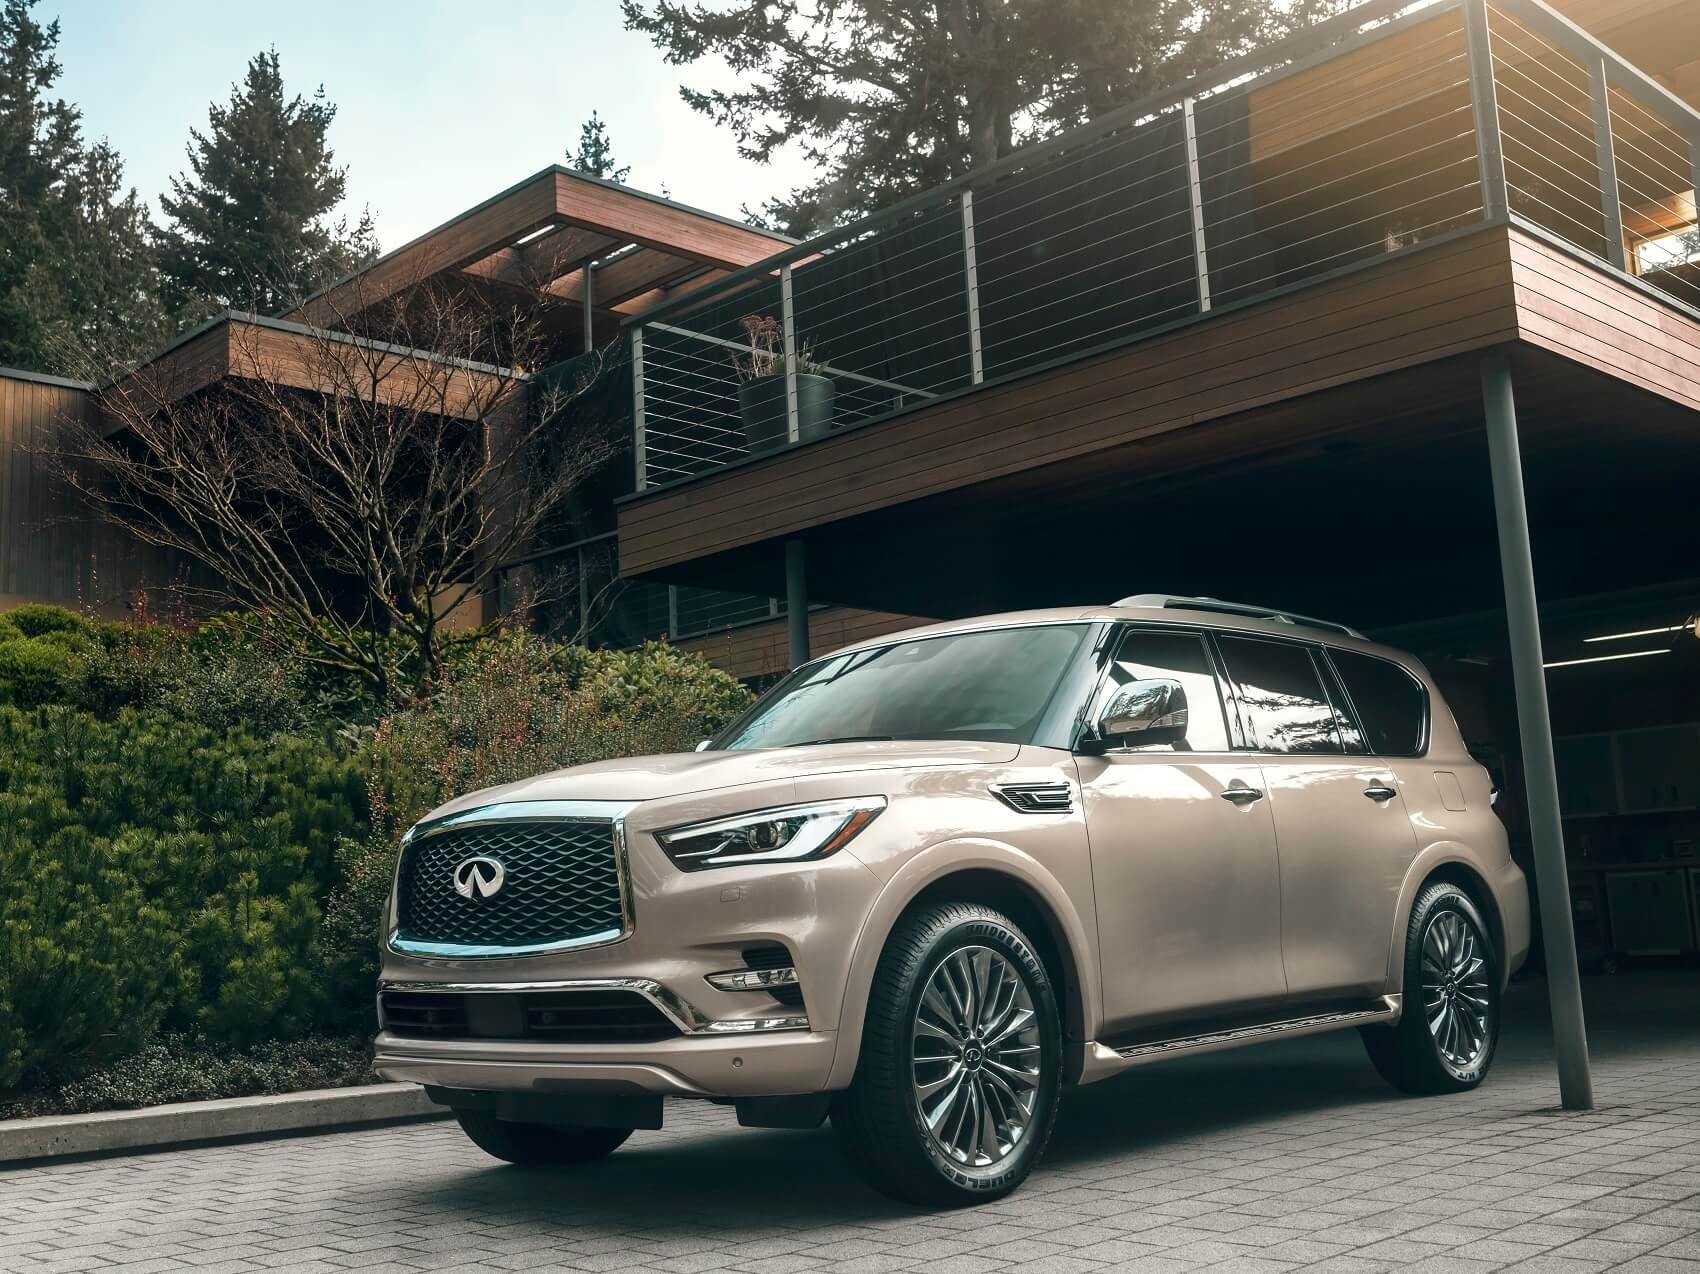 What You’ll Learn from Our INFINITI Vehicle Reviews